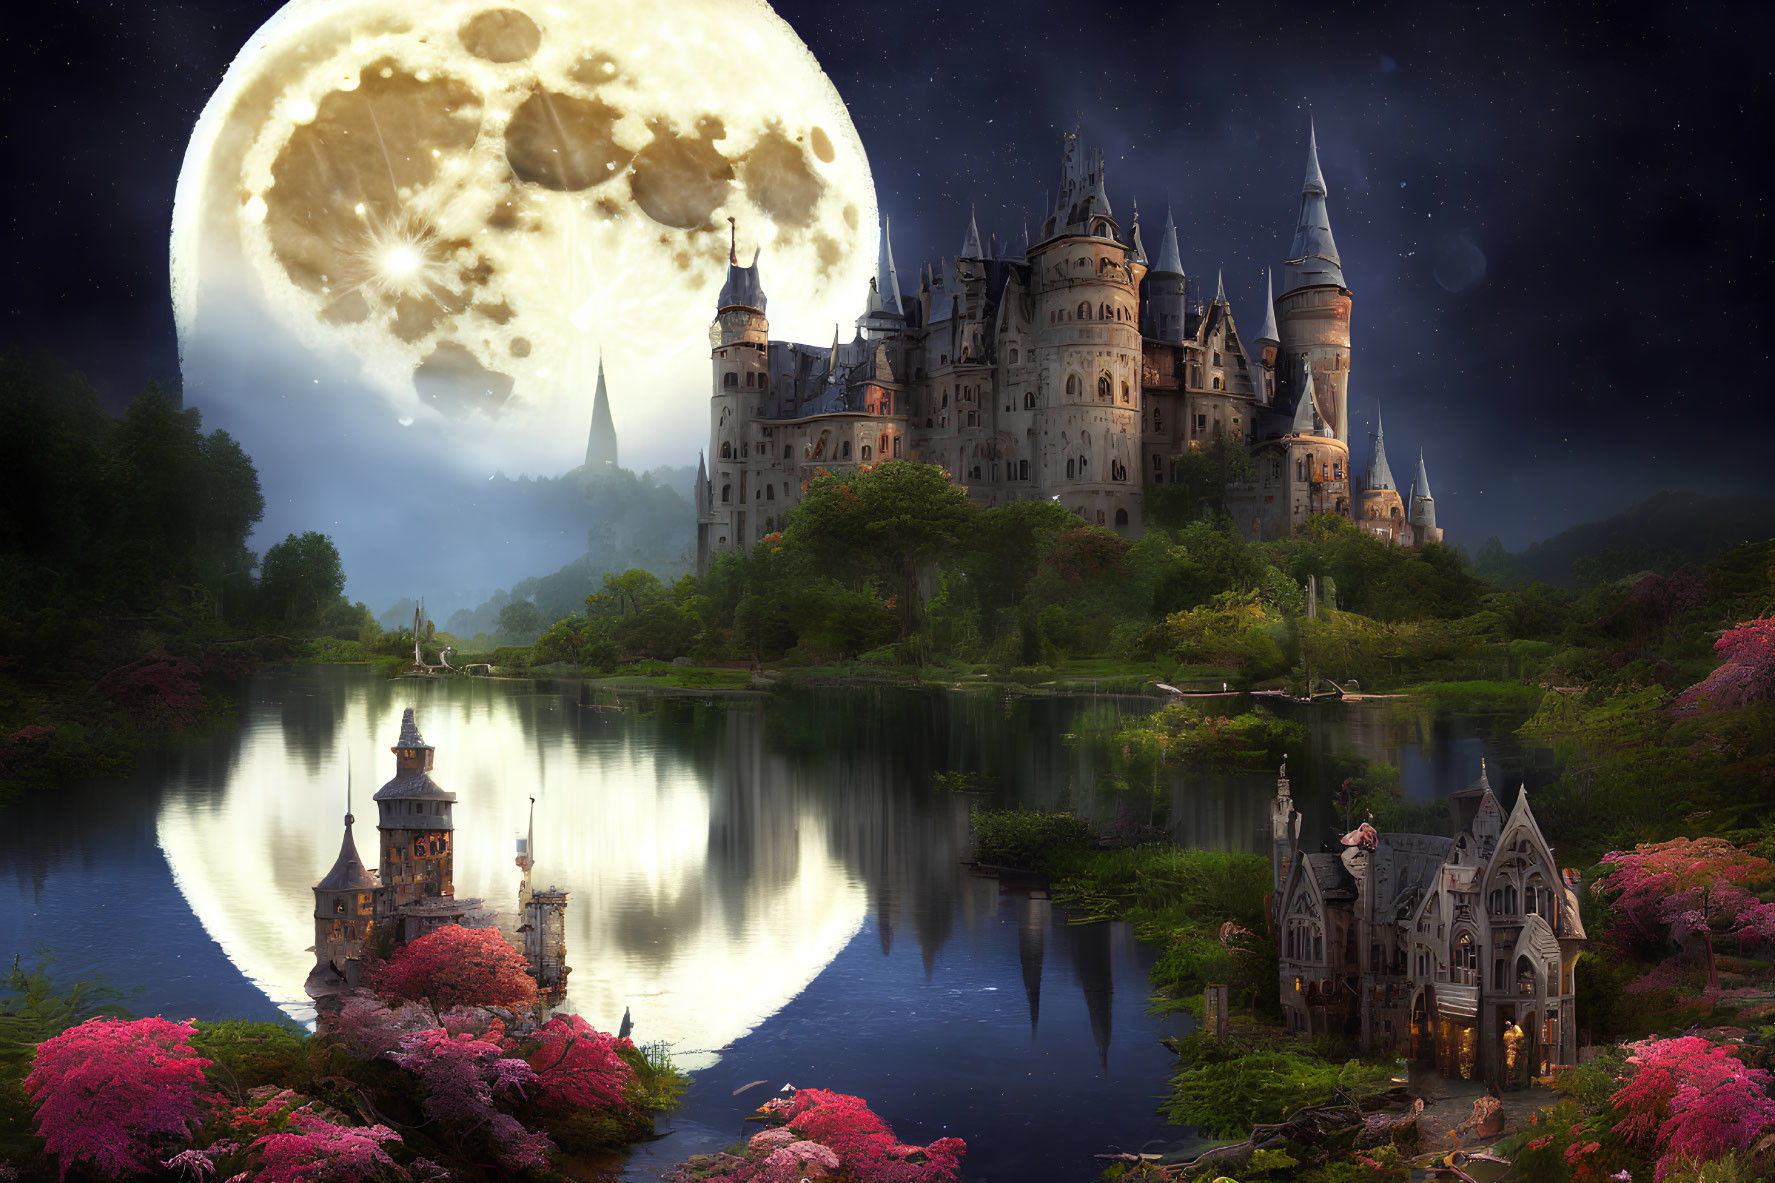 Fantasy castle by tranquil lake under starry sky with detailed moon and lush flora.